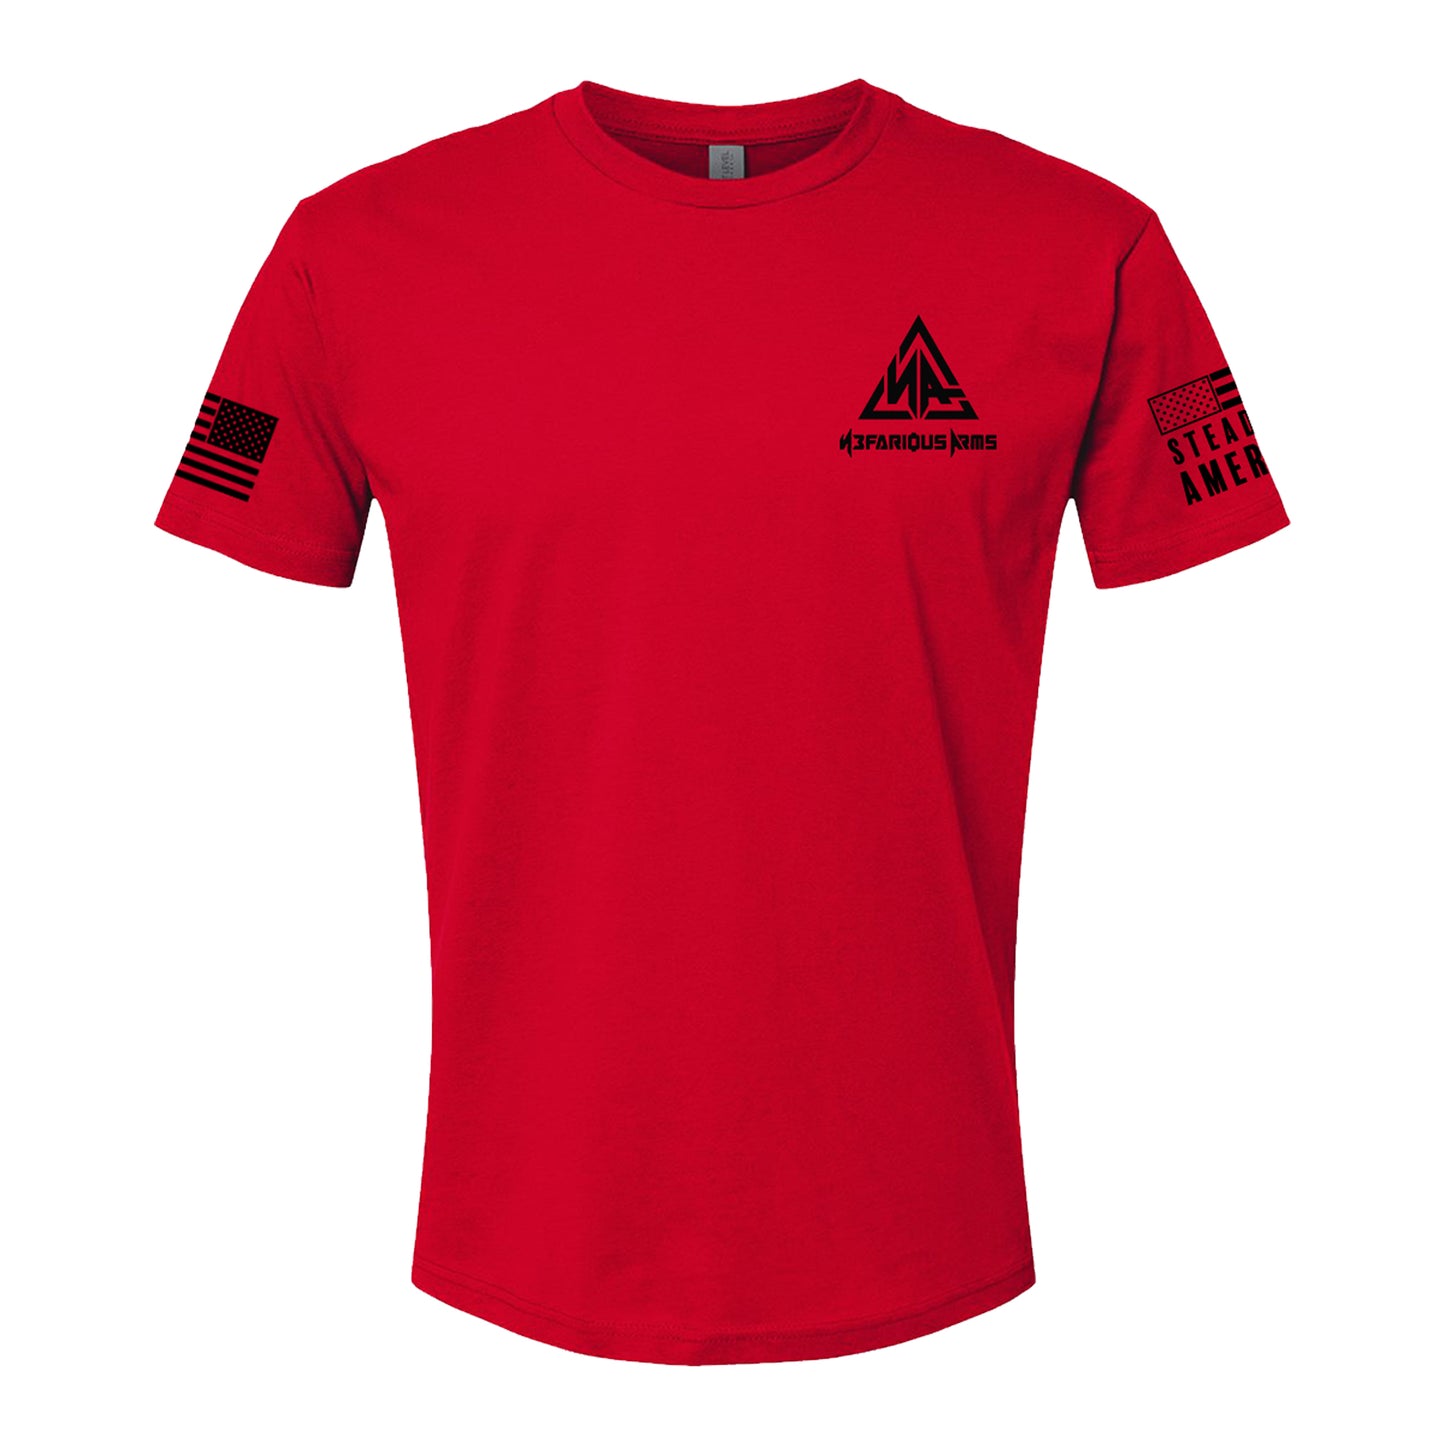 Nefarious Arms, Short Sleeve, Red